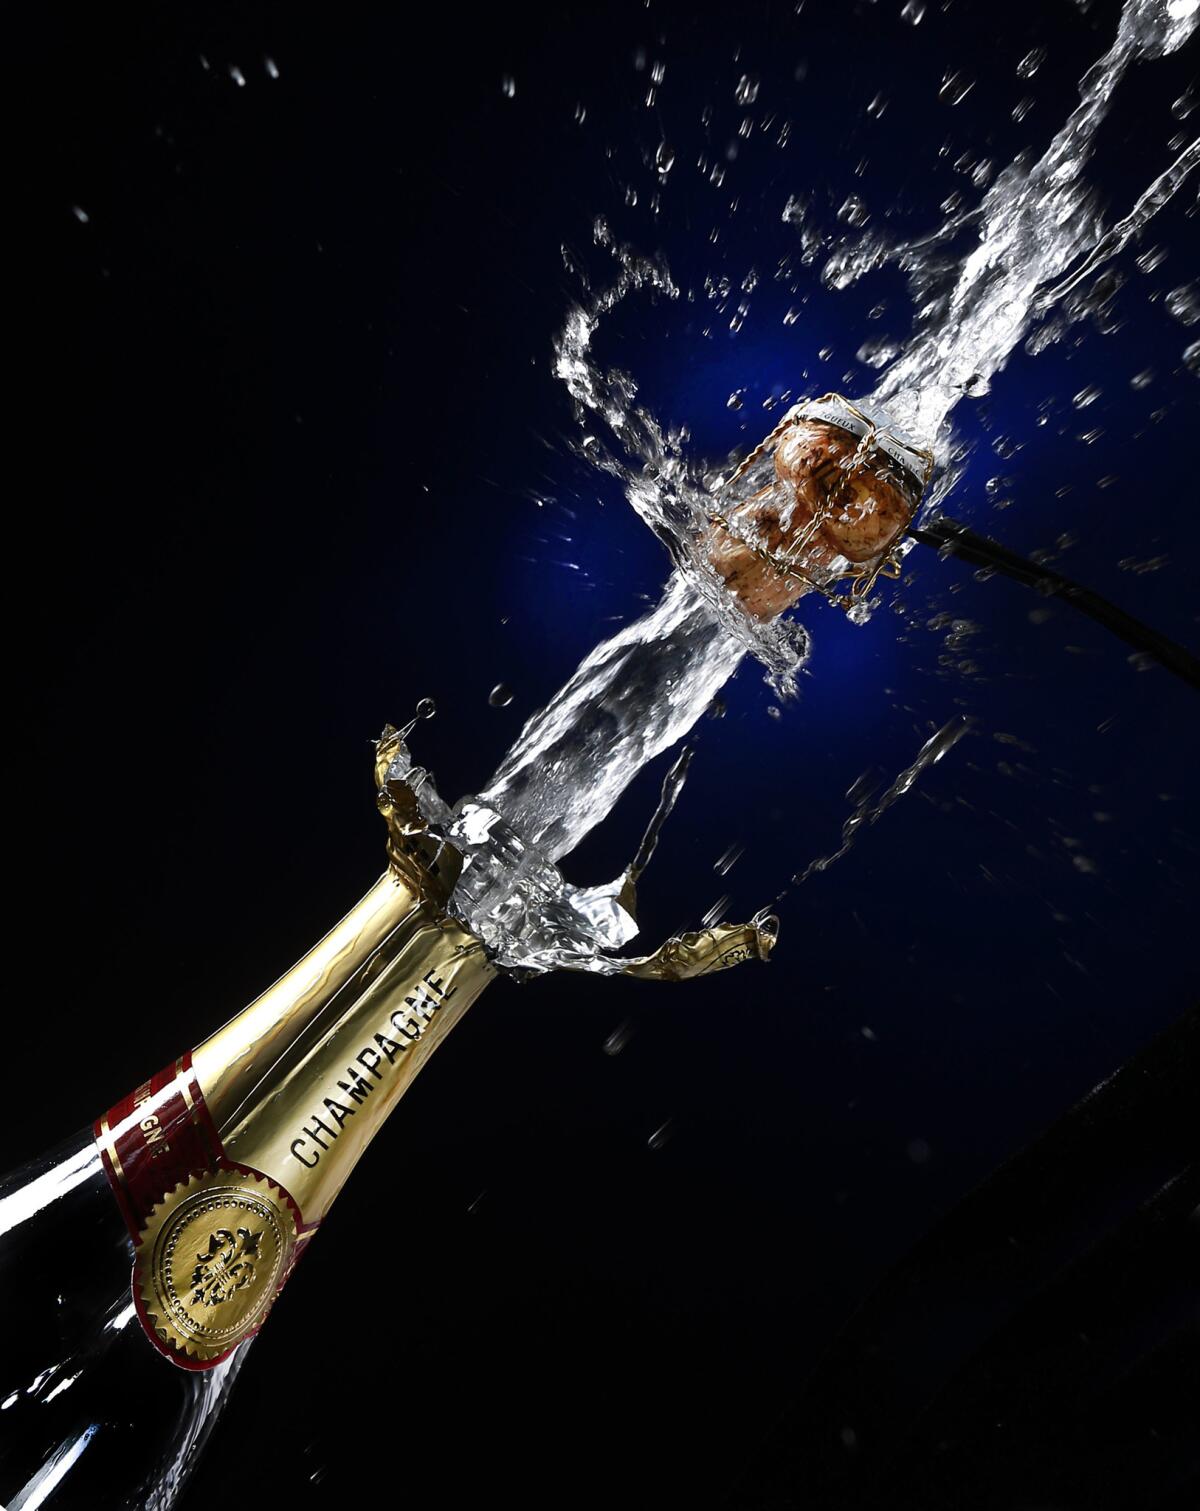 Making a splash with Champagne - Los Angeles Times